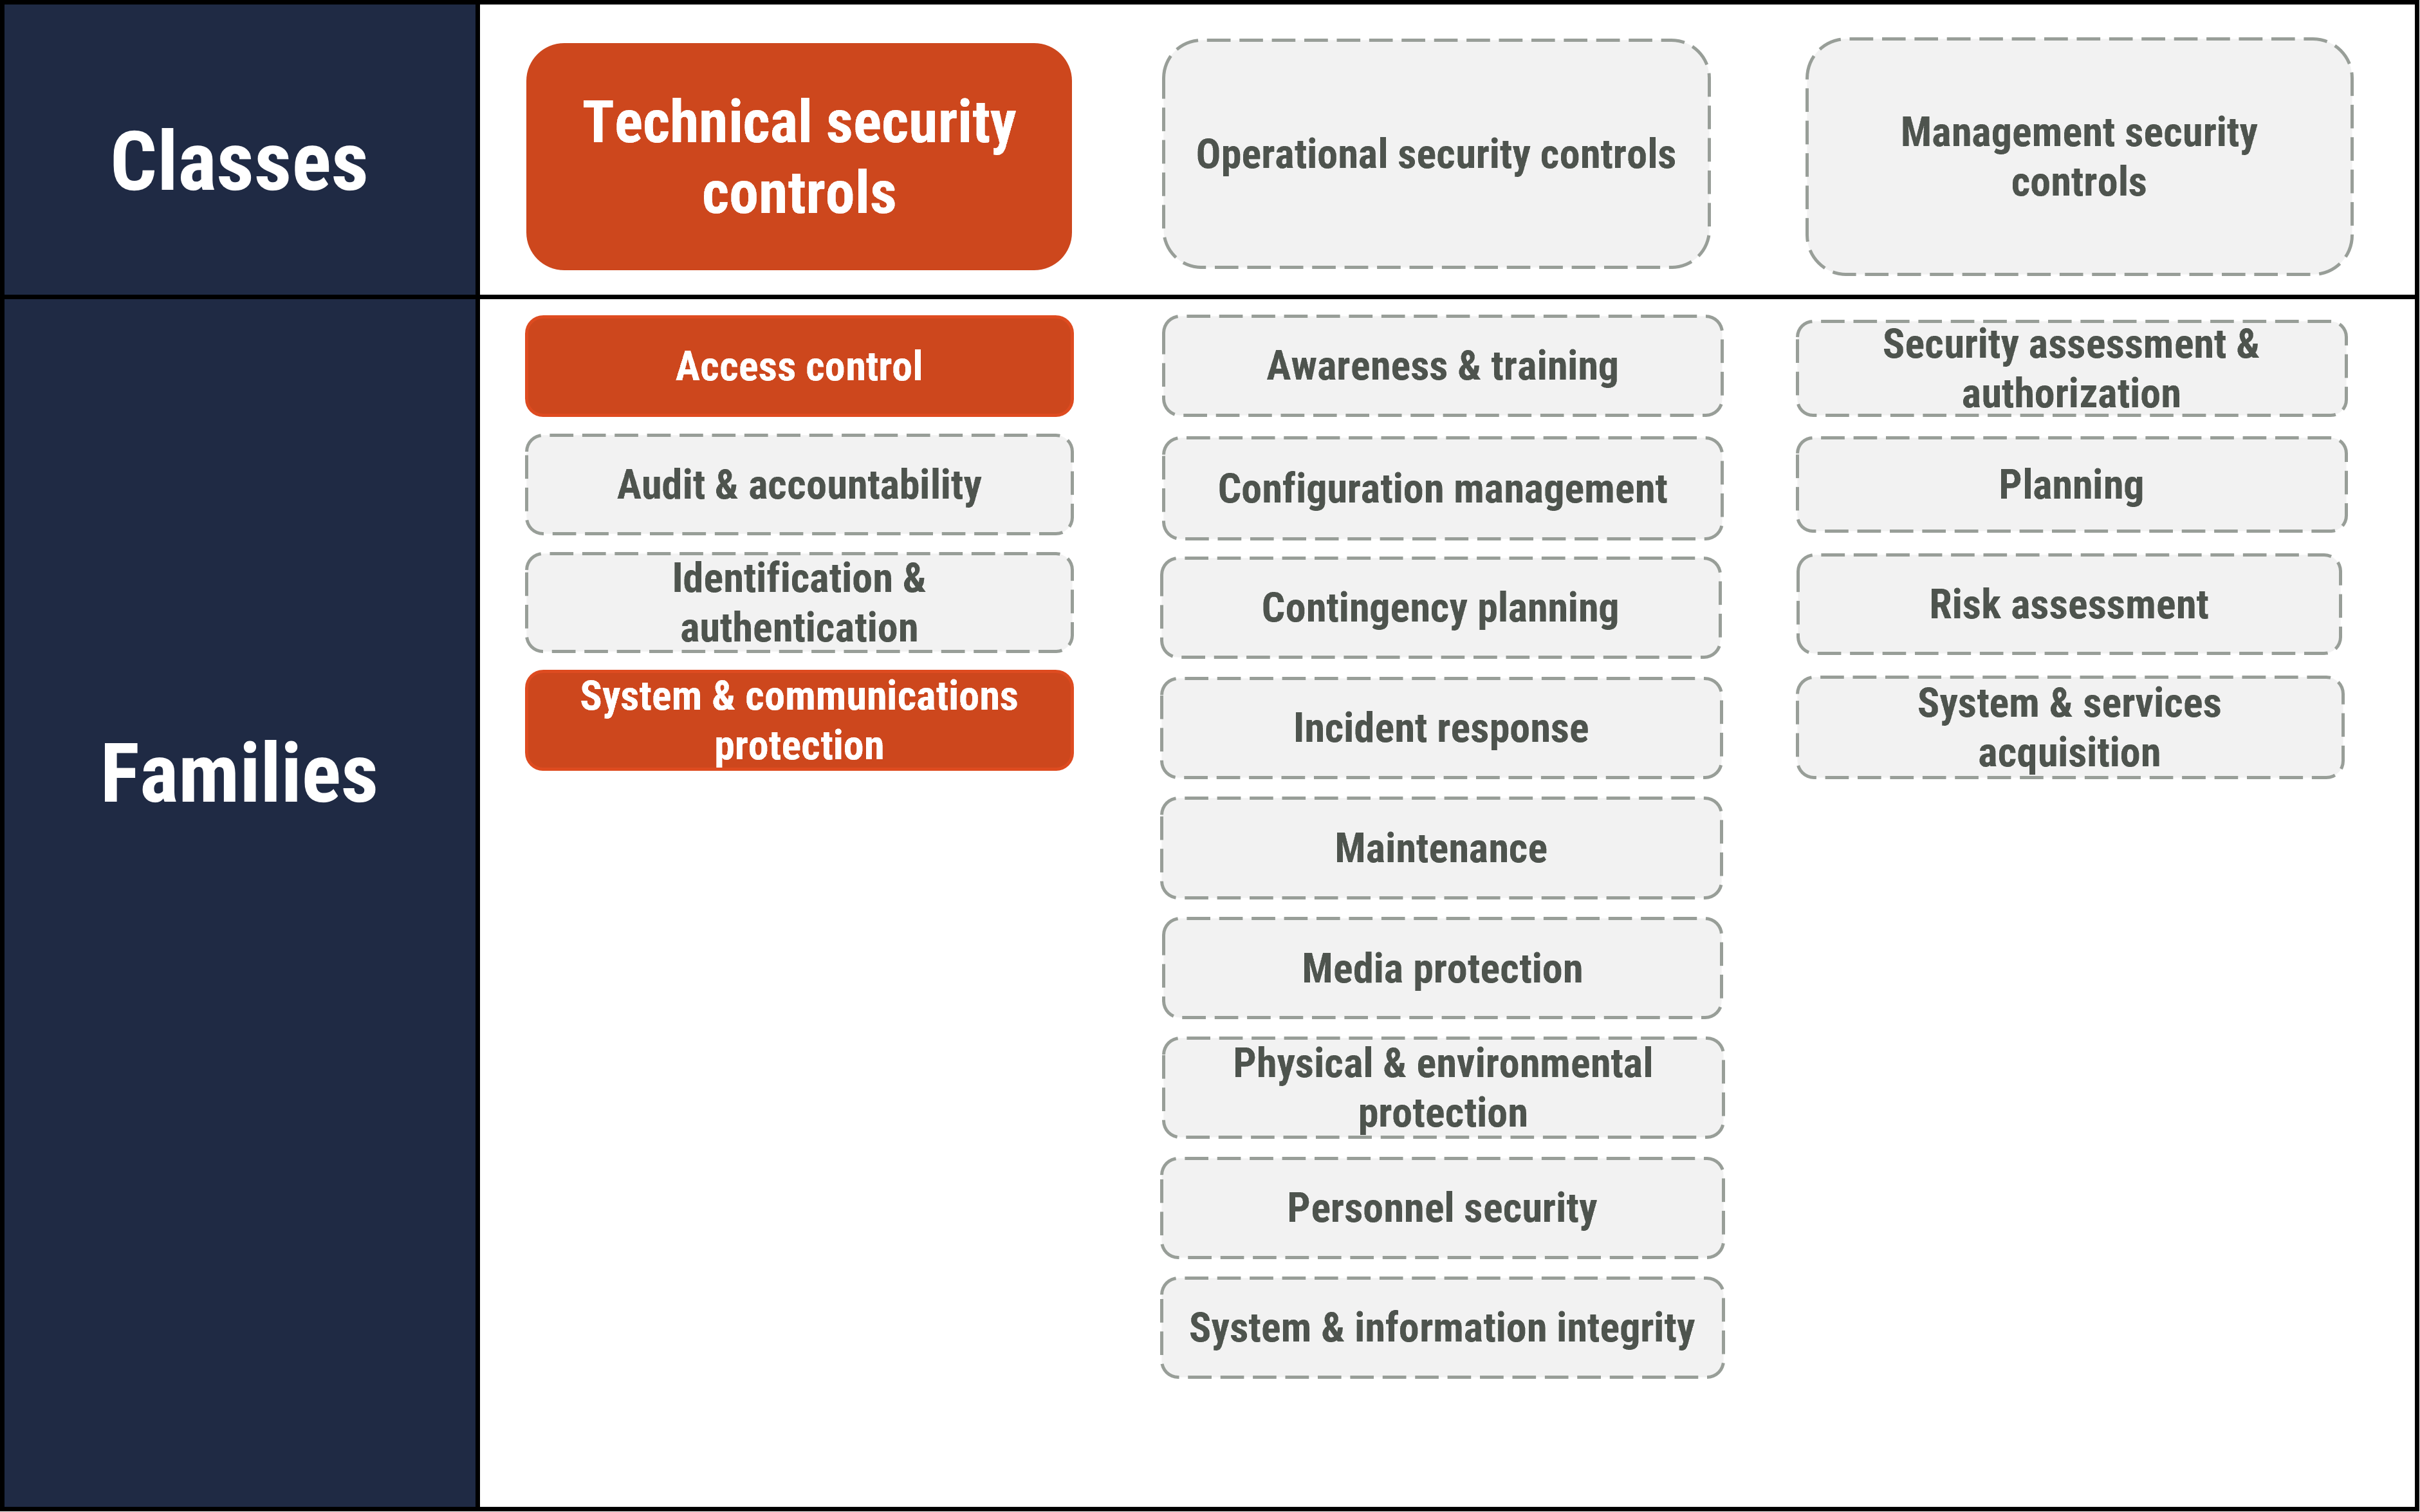 Figure 2: Applicable security control classes and families described in ITSG-33 - long description to follow